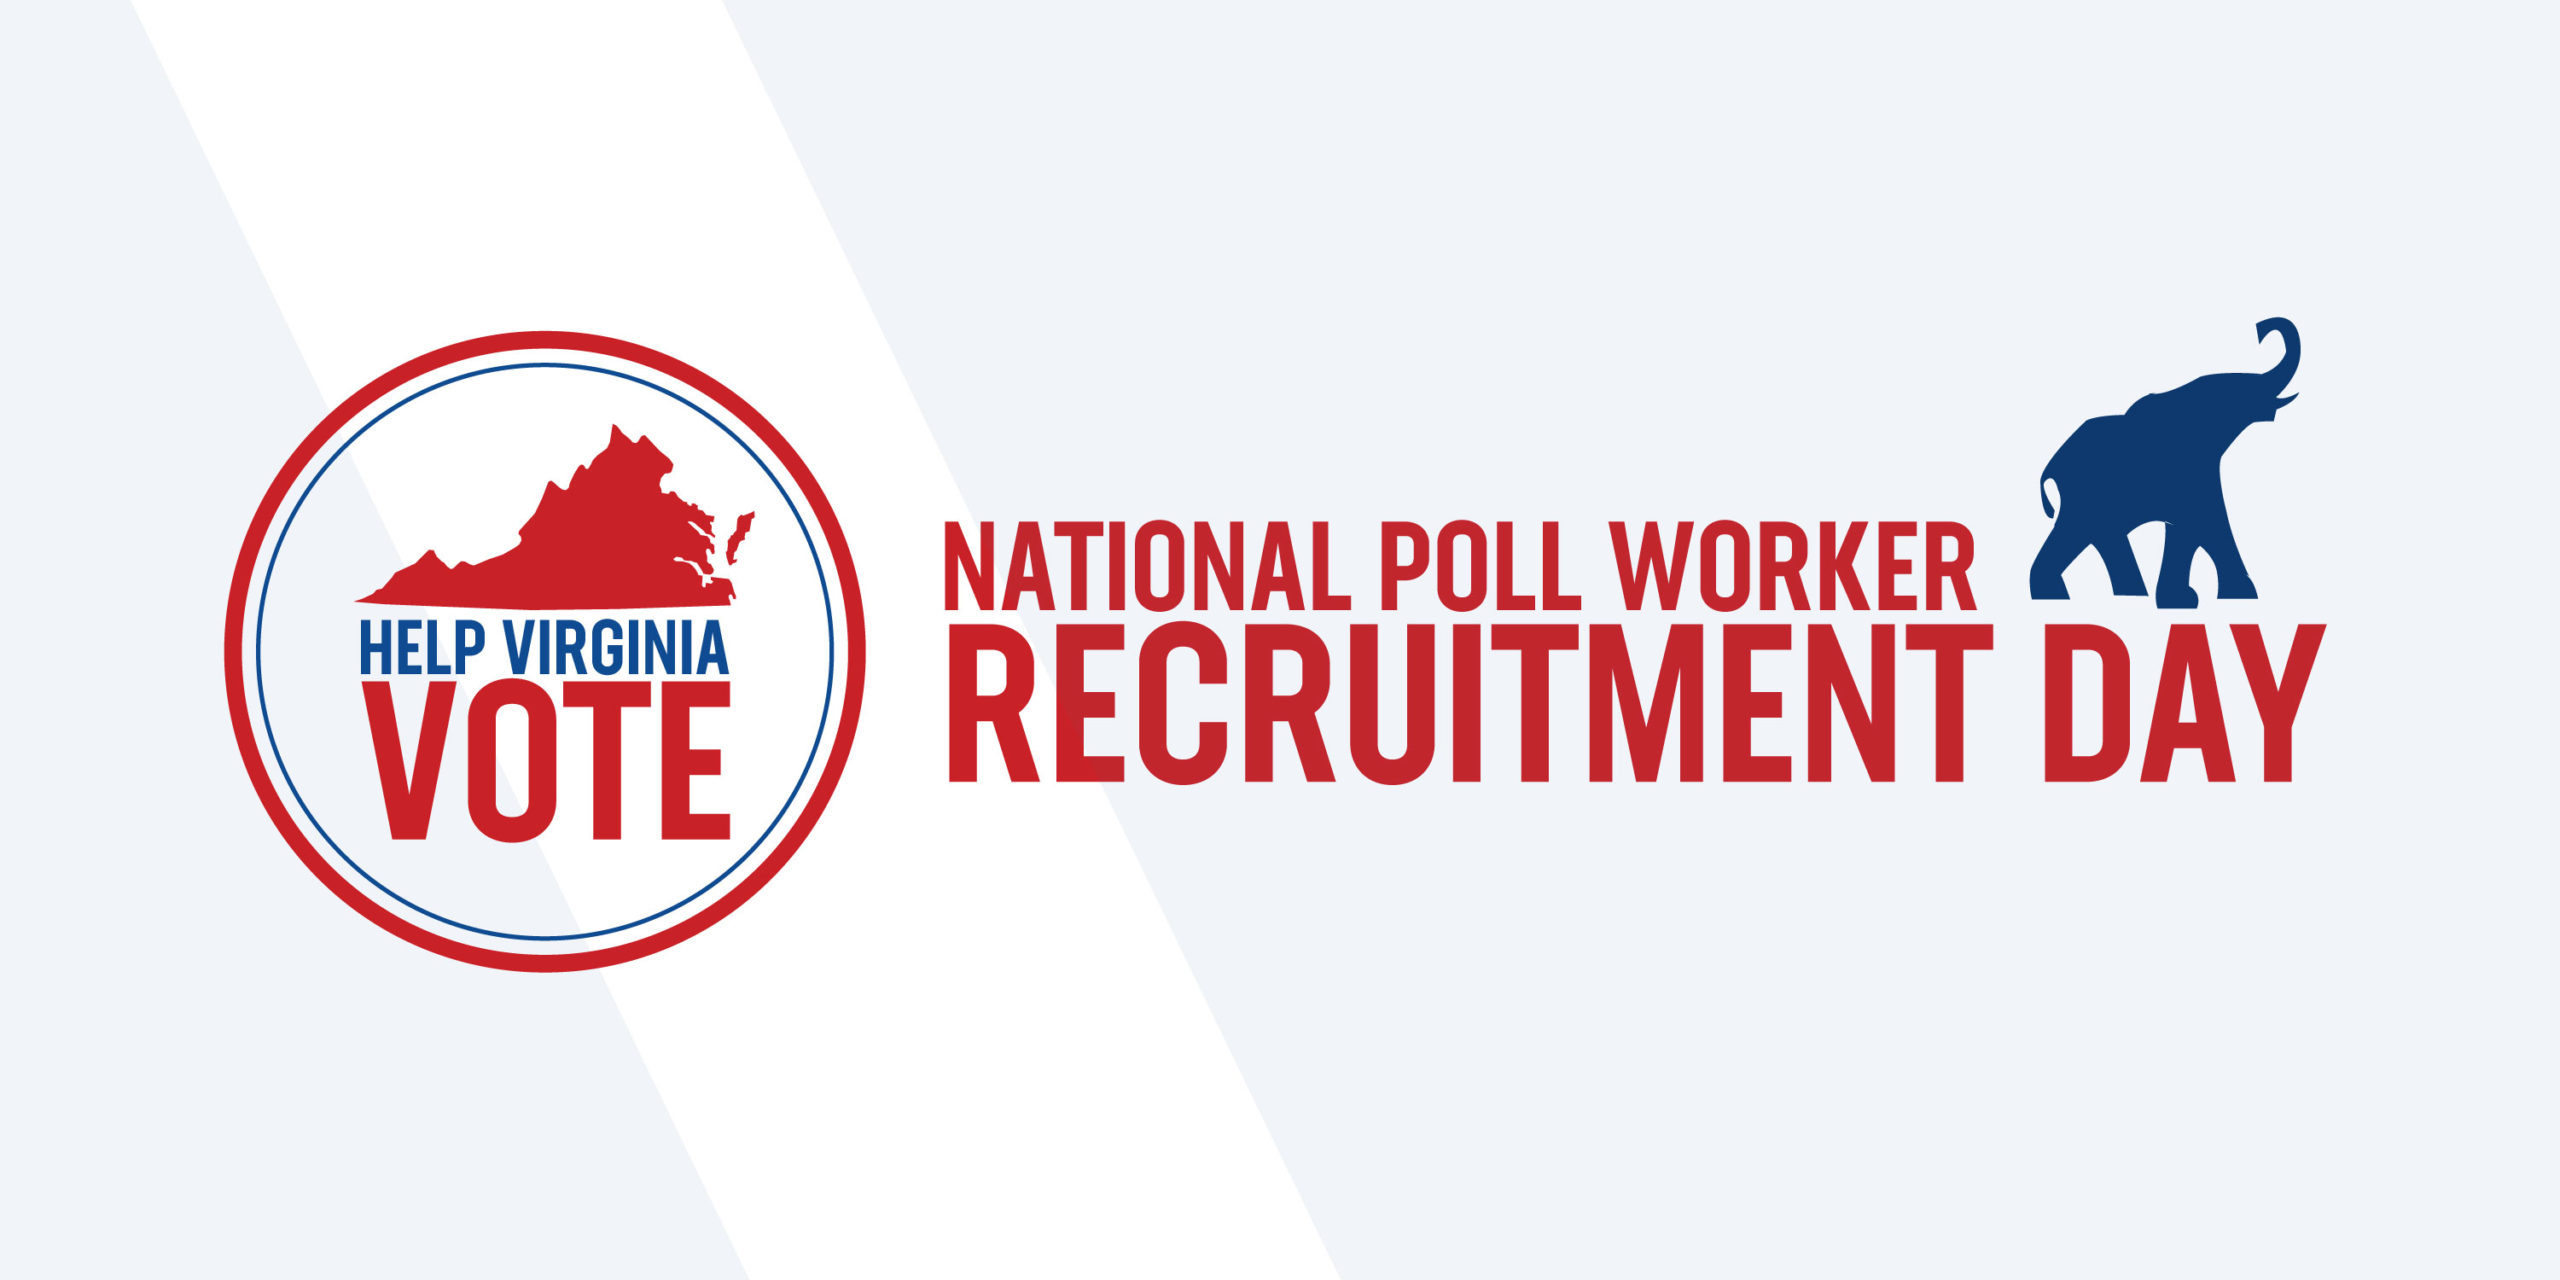 FCRC Celebrates National Poll Worker Recruitment Day